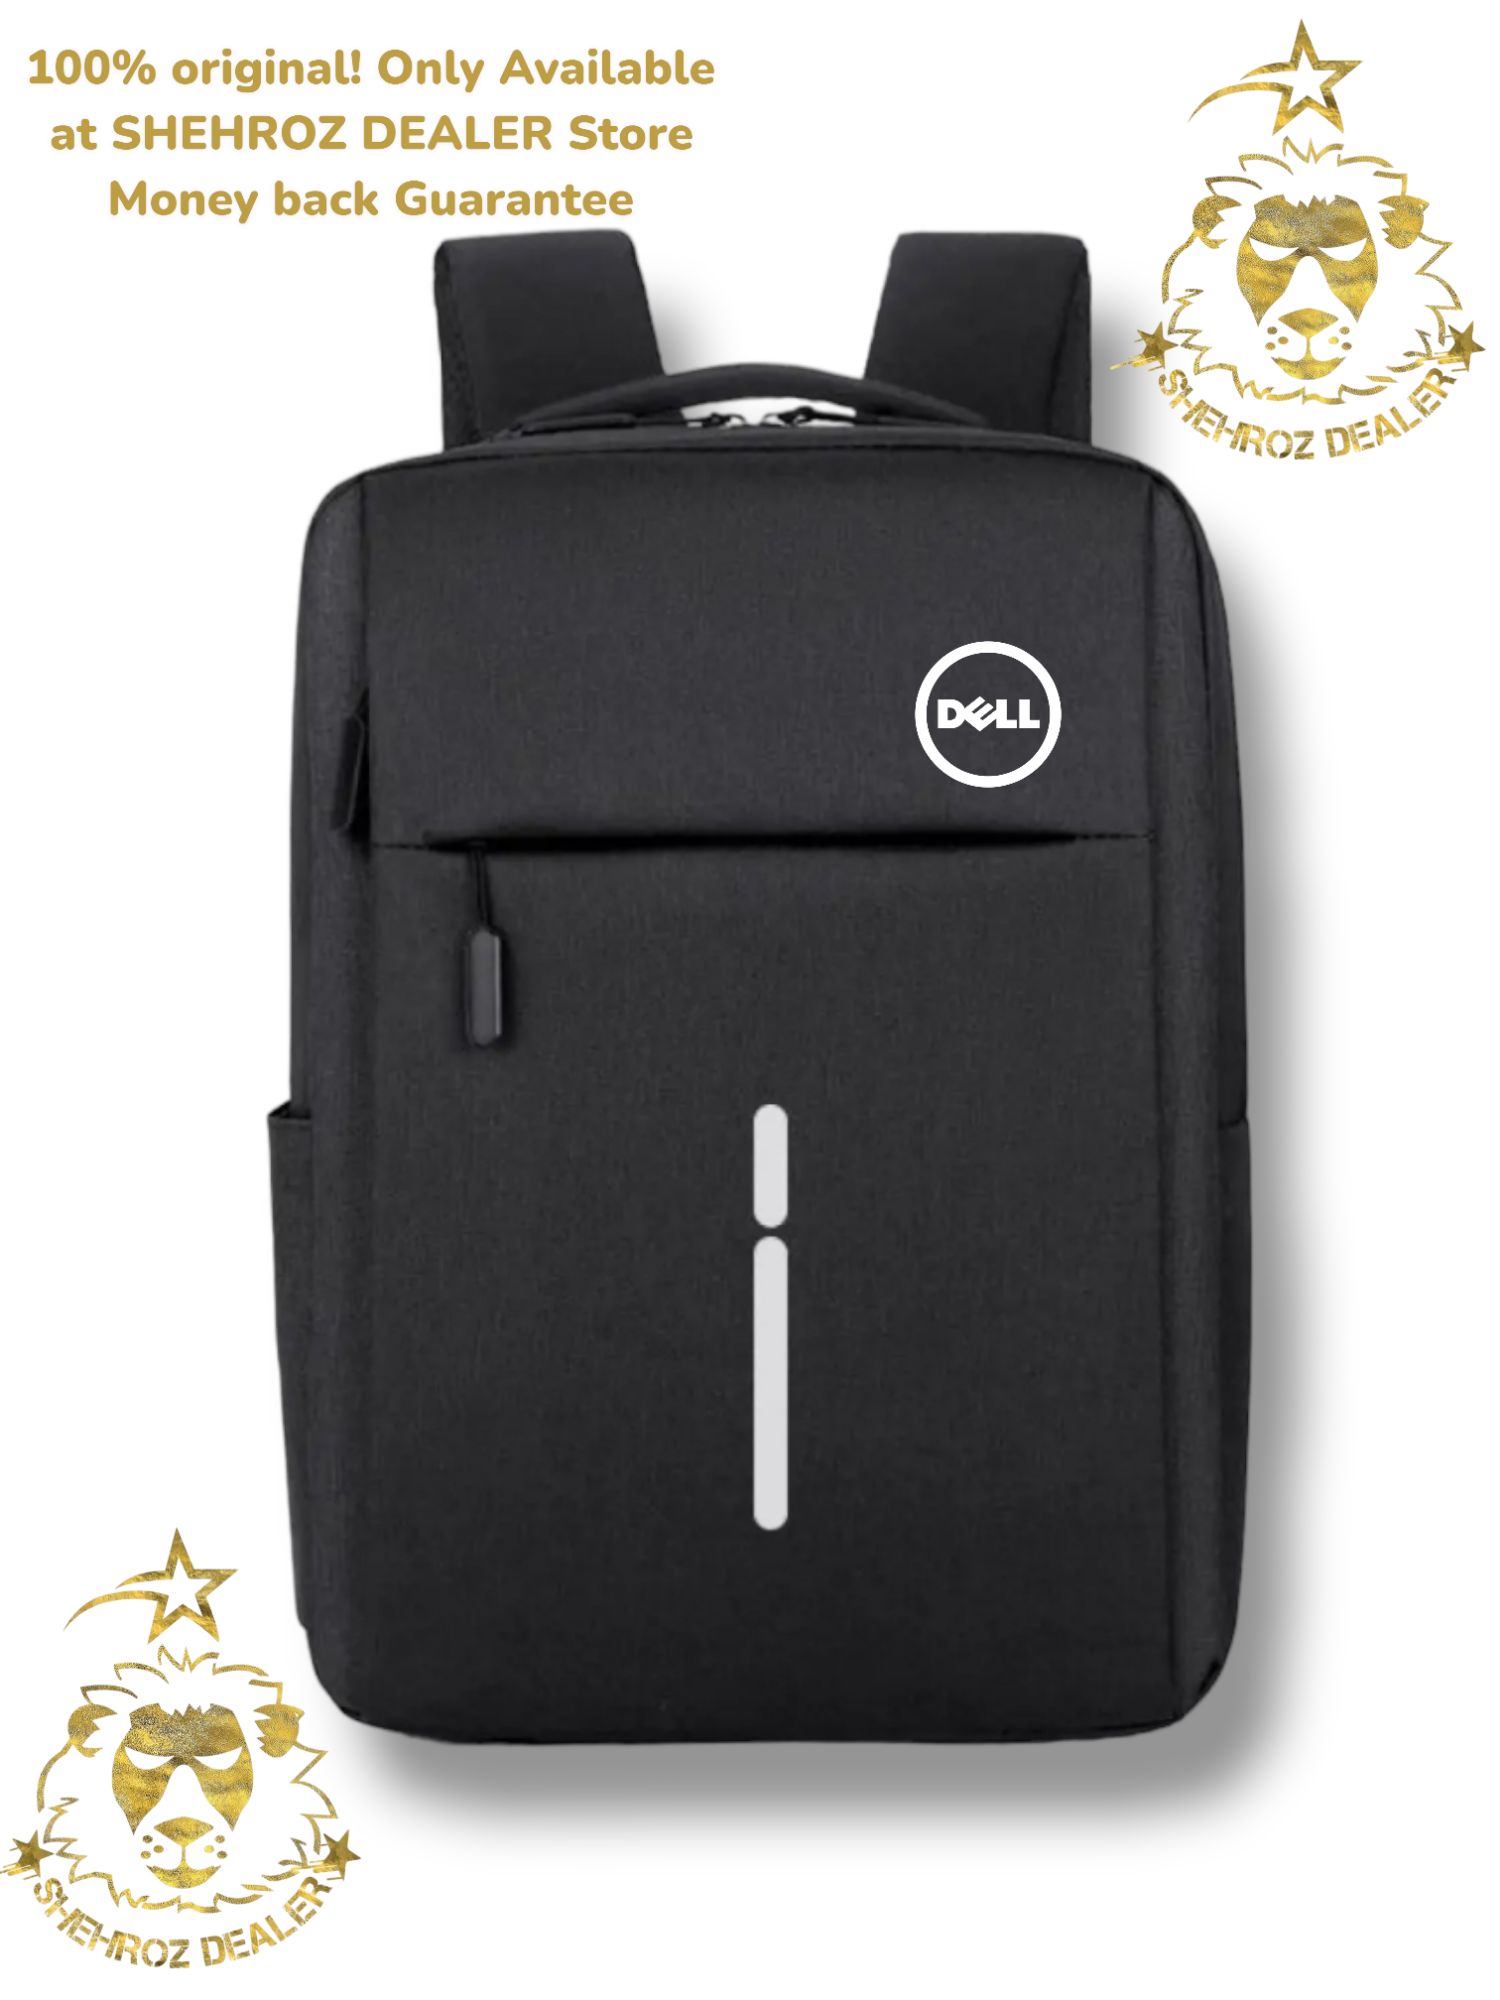 India) Dell EcoLoop Urban Backpack - Gray - CP4523G - Buy (India) Dell  EcoLoop Urban Backpack - Gray - CP4523G Online at Low Price in India -  Amazon.in